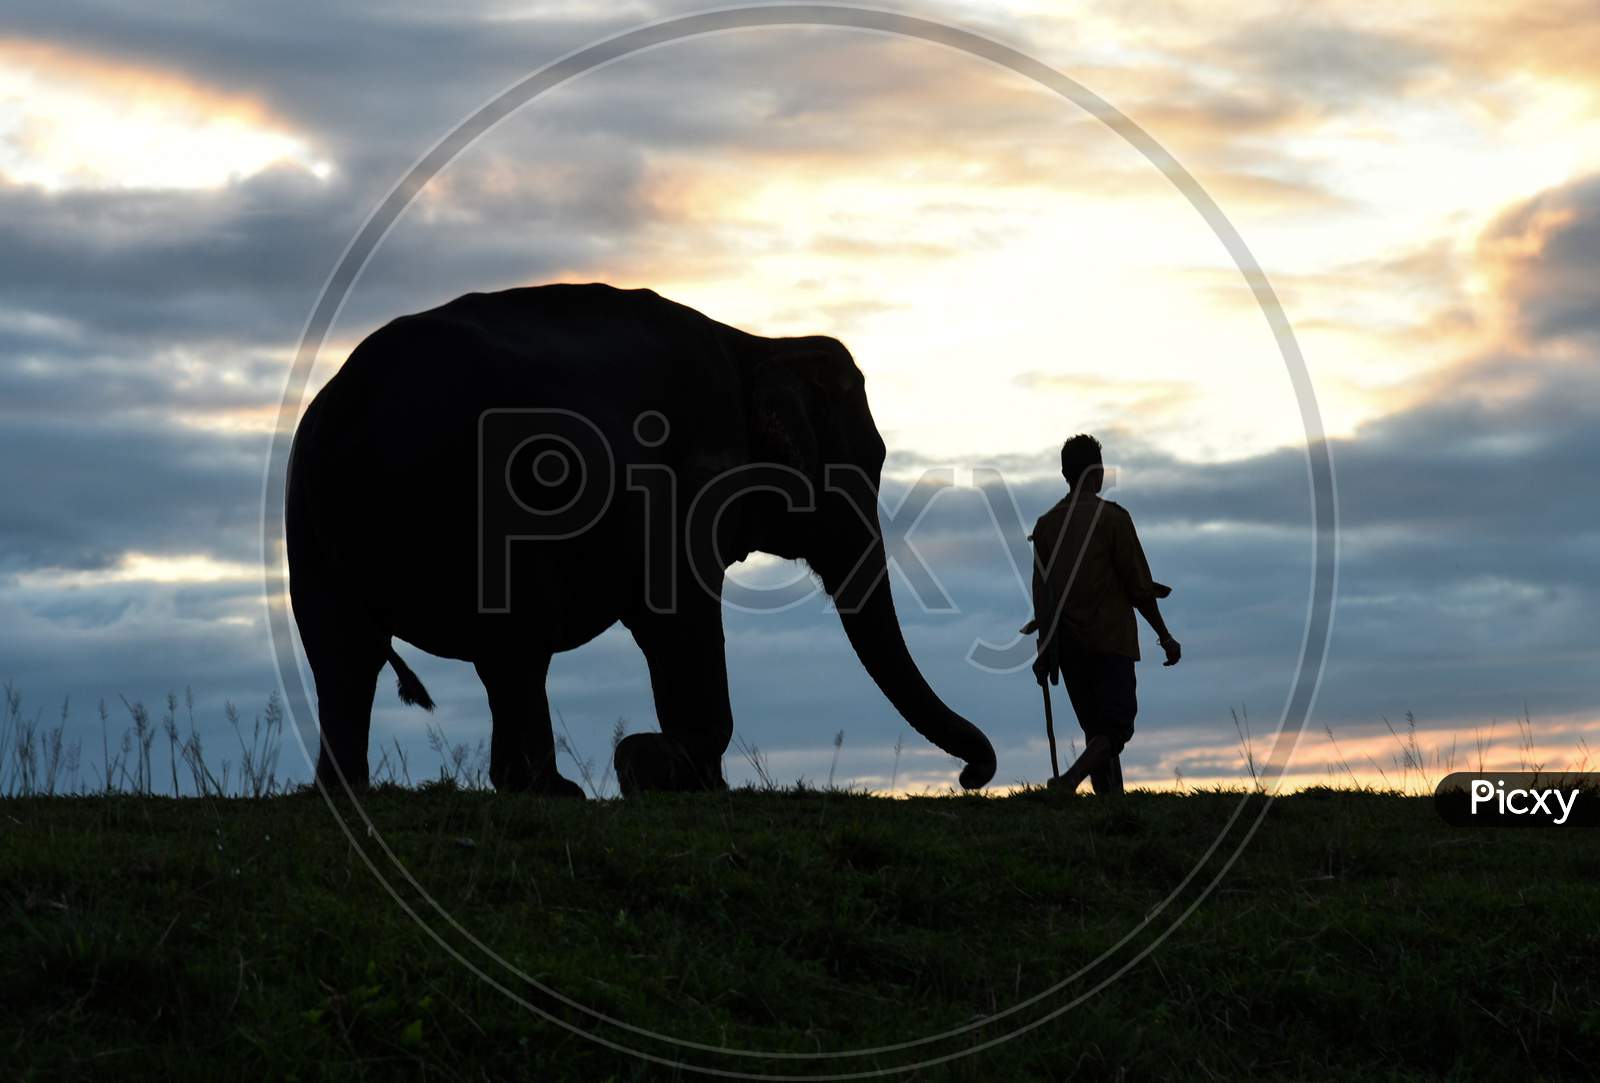 Mahout With Elephants At Sunset In The Kaziranga National Park In Golaghat District Of Assam, India